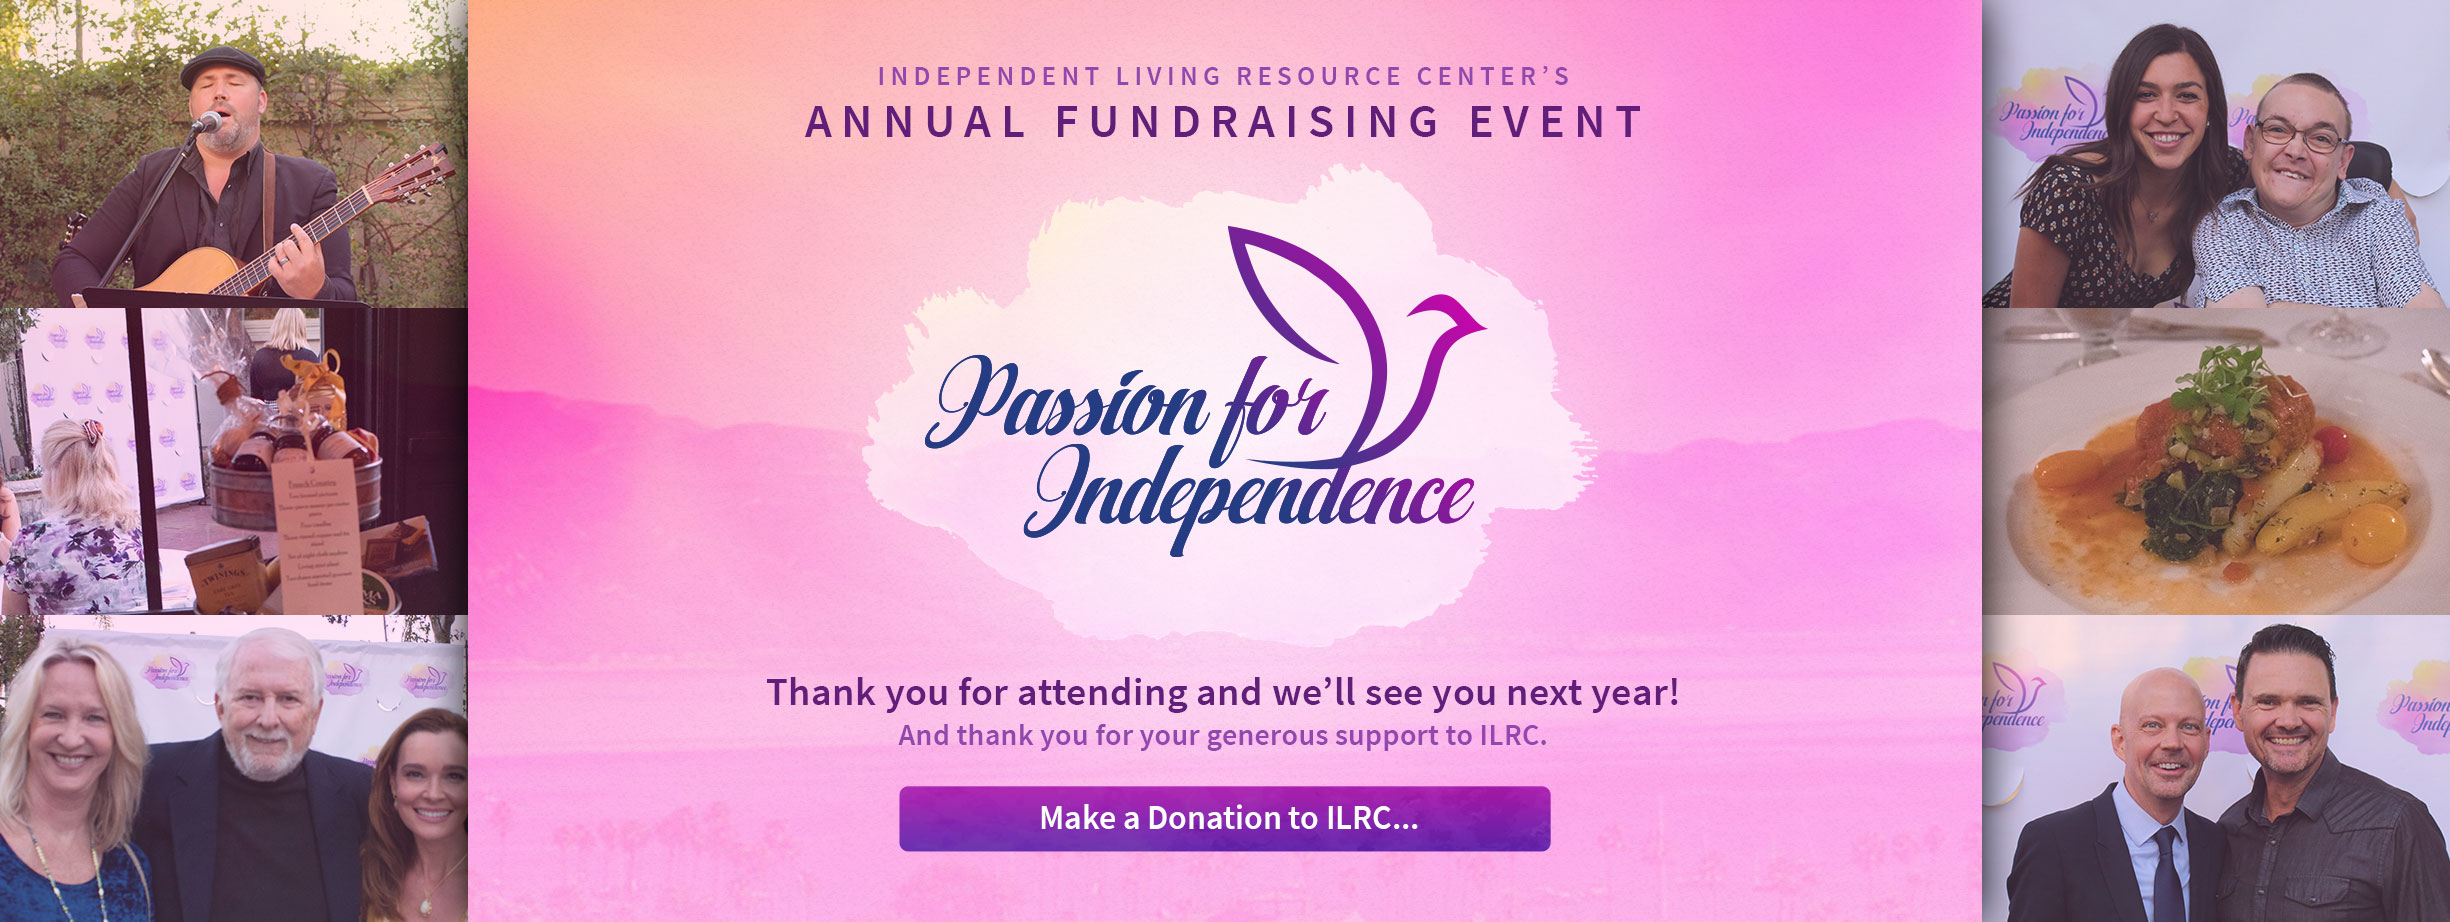 Slide of the Passion for Independence ILRC's Annual Fundrasing Event. Thank you for attending and we'll see you next year! And thank you for your generous support to ILRC. Click to make a donation to ILRC.